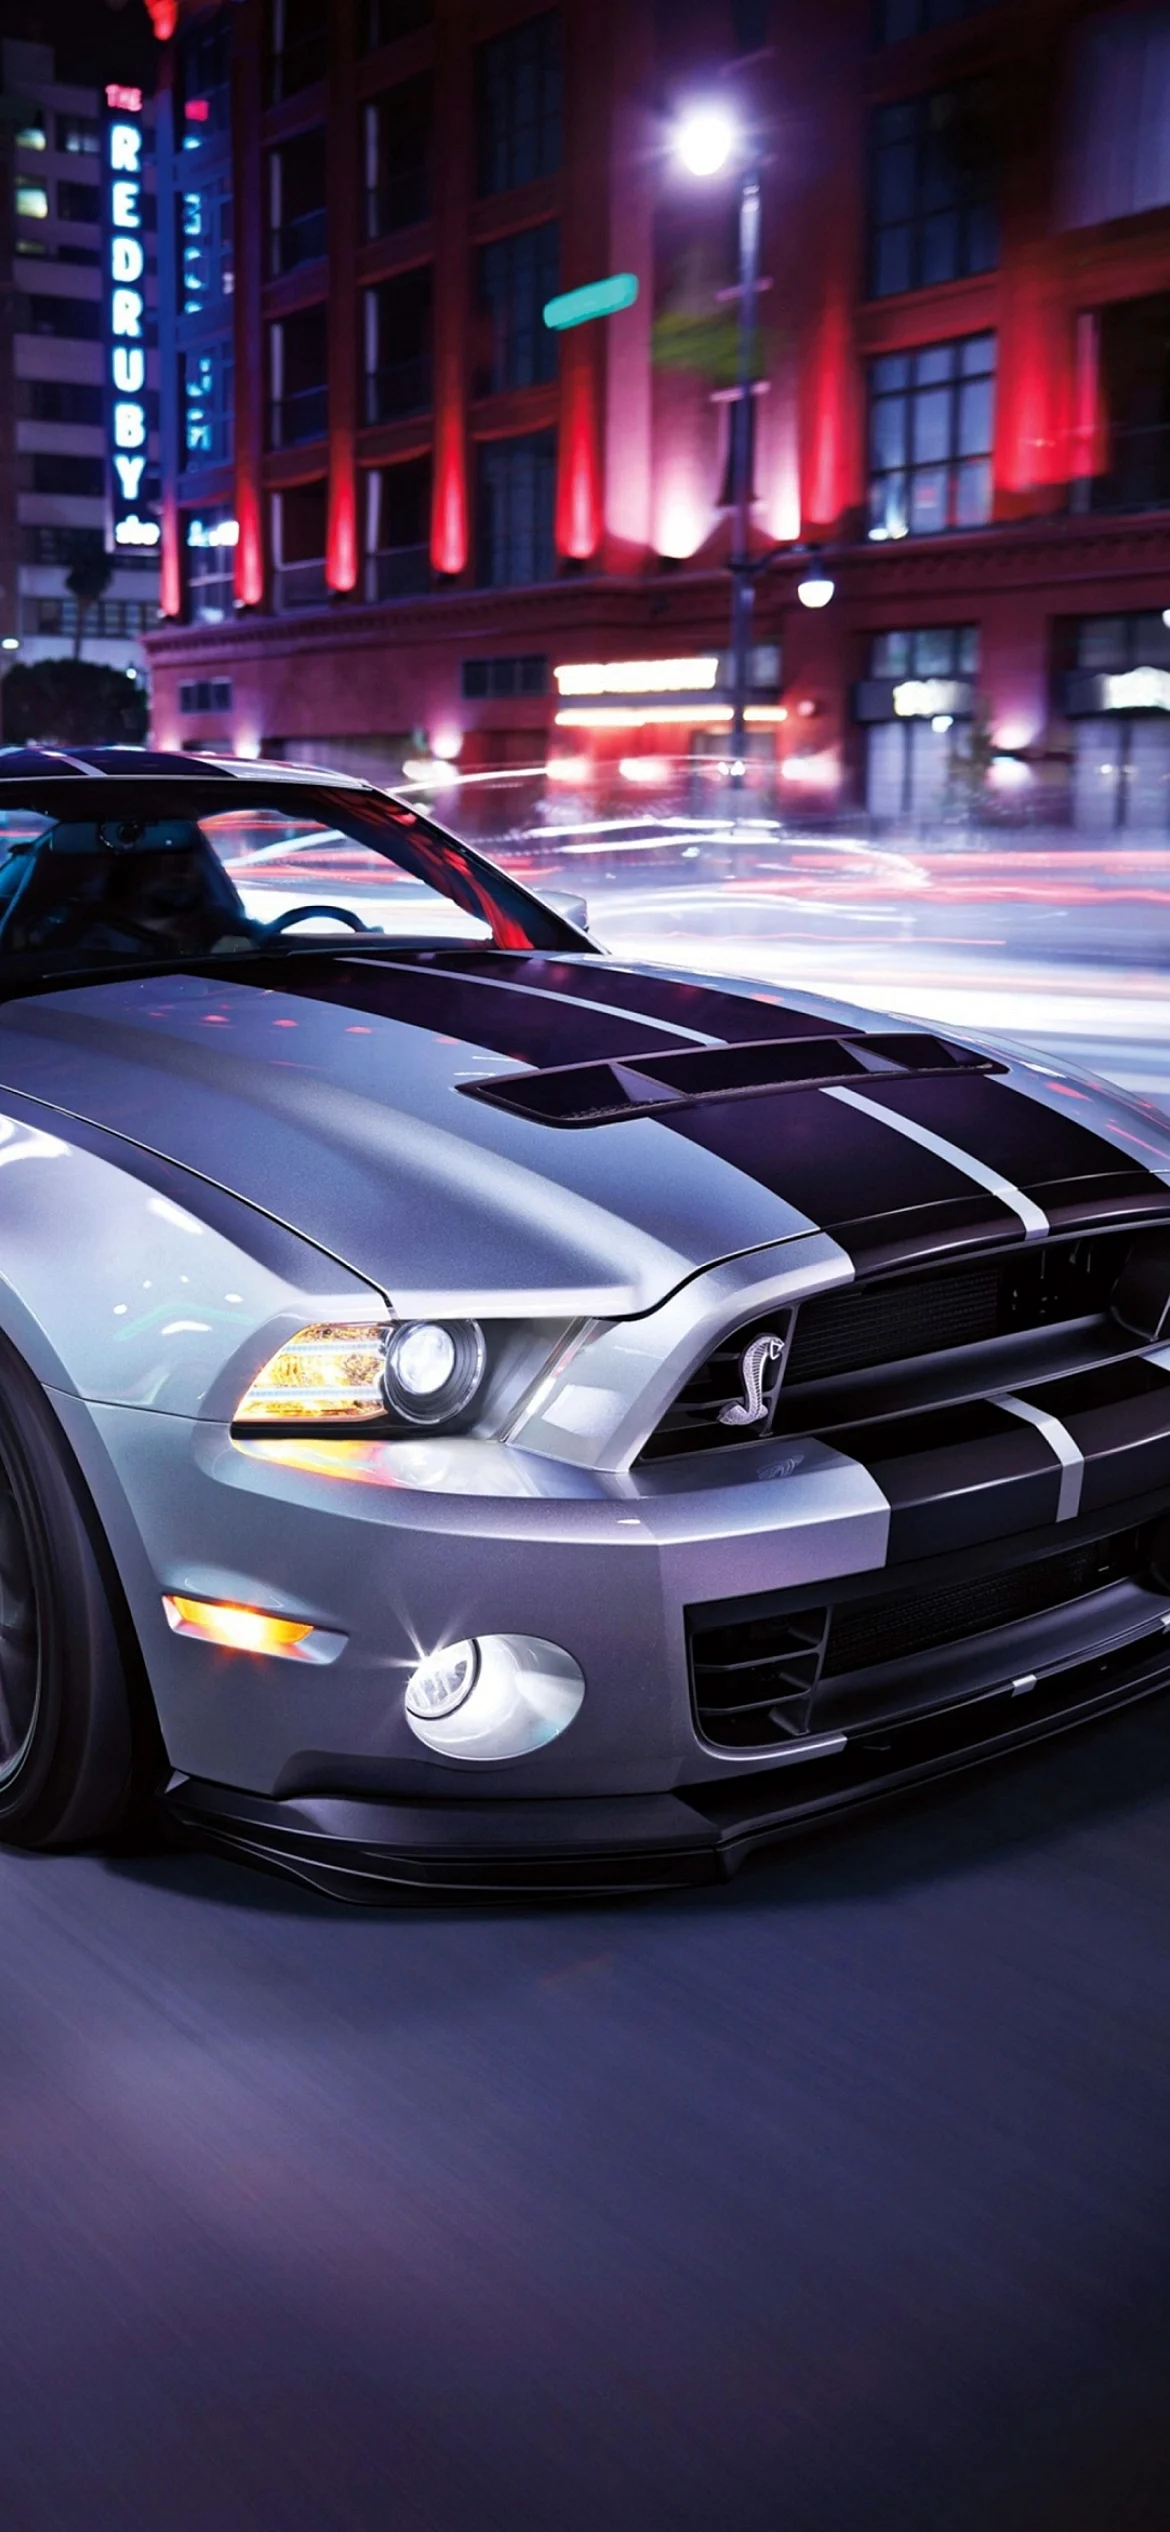 Ford Shelby Gt500 Wallpaper for iPhone 13